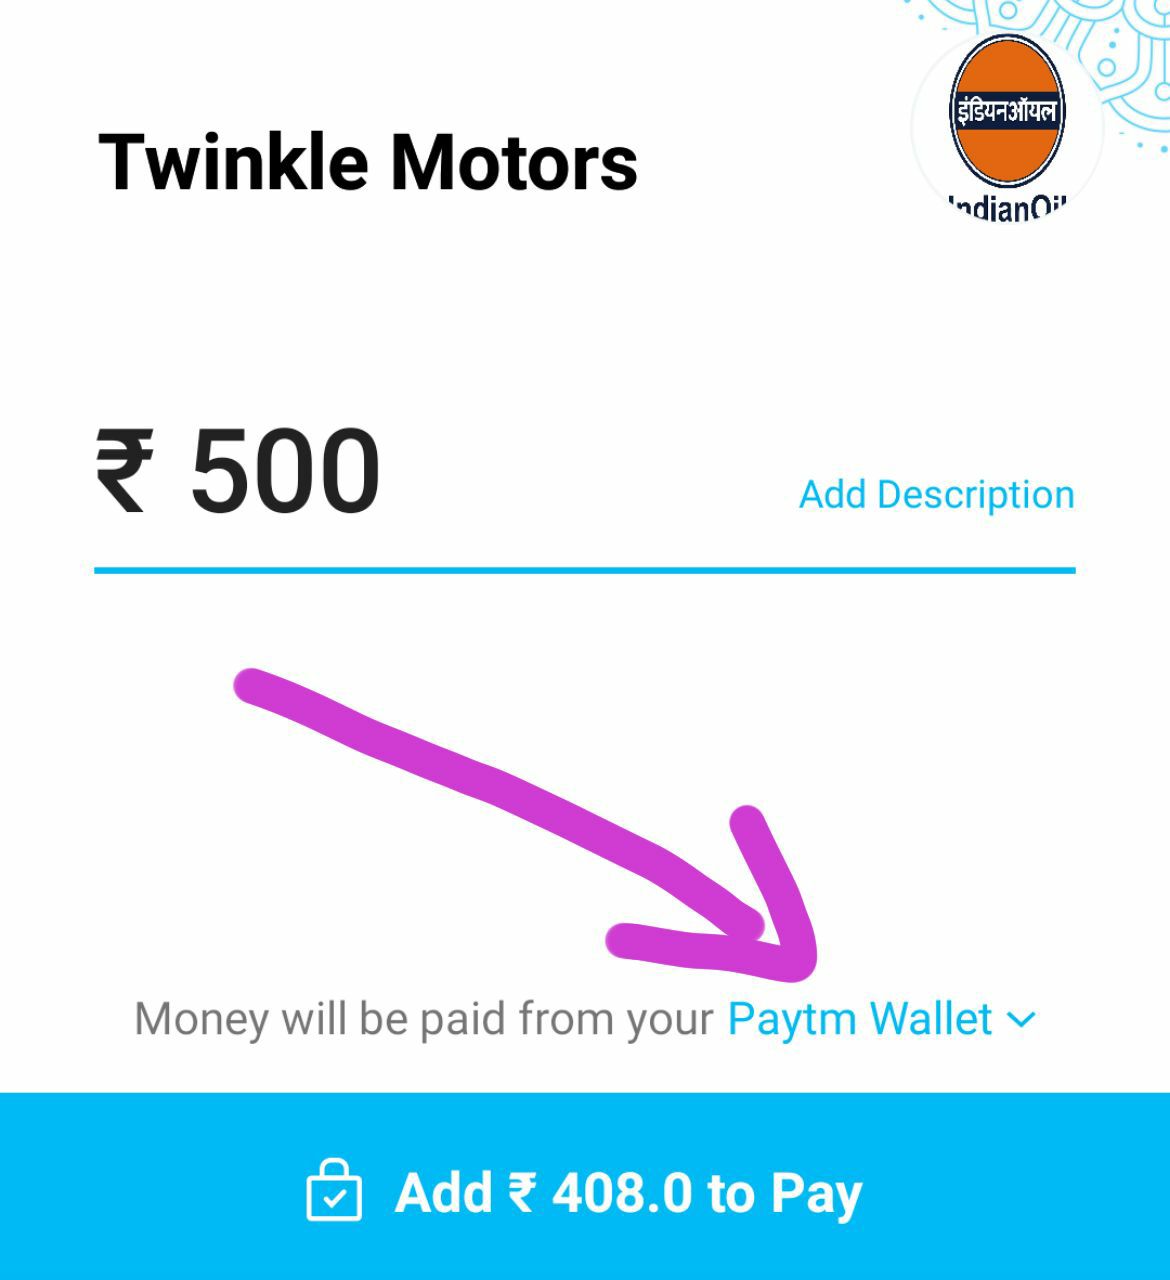 Paytm Postpaid Best Trick - Transfer Paytm Postpaid Balance Into Paytm Wallet/Bank Account With 0% Charge 